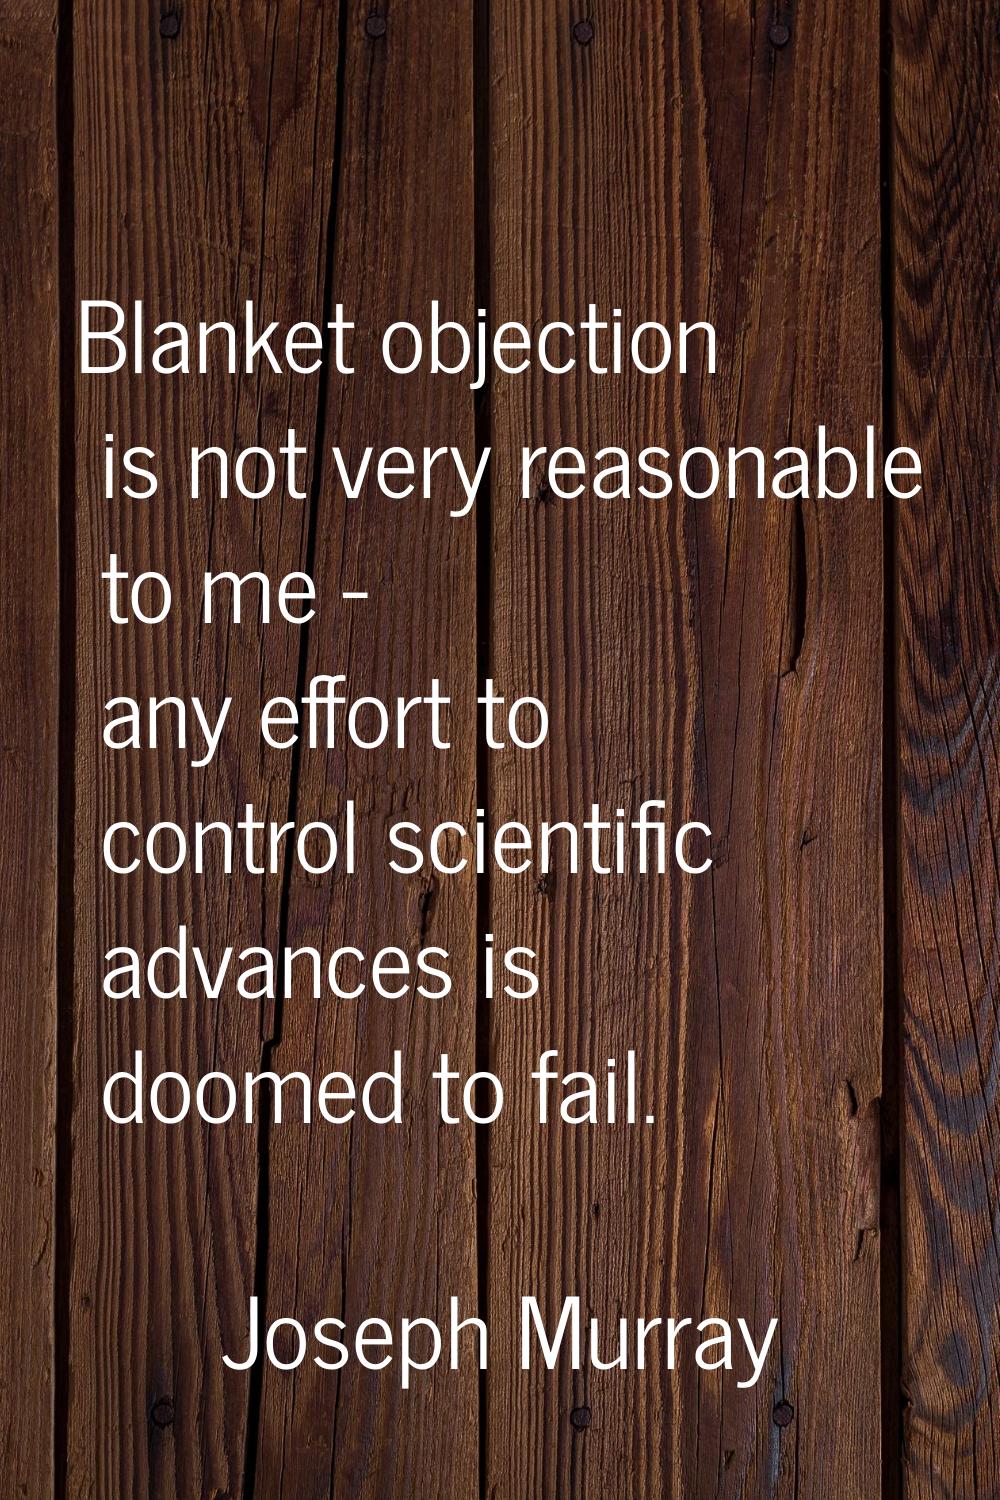 Blanket objection is not very reasonable to me - any effort to control scientific advances is doome